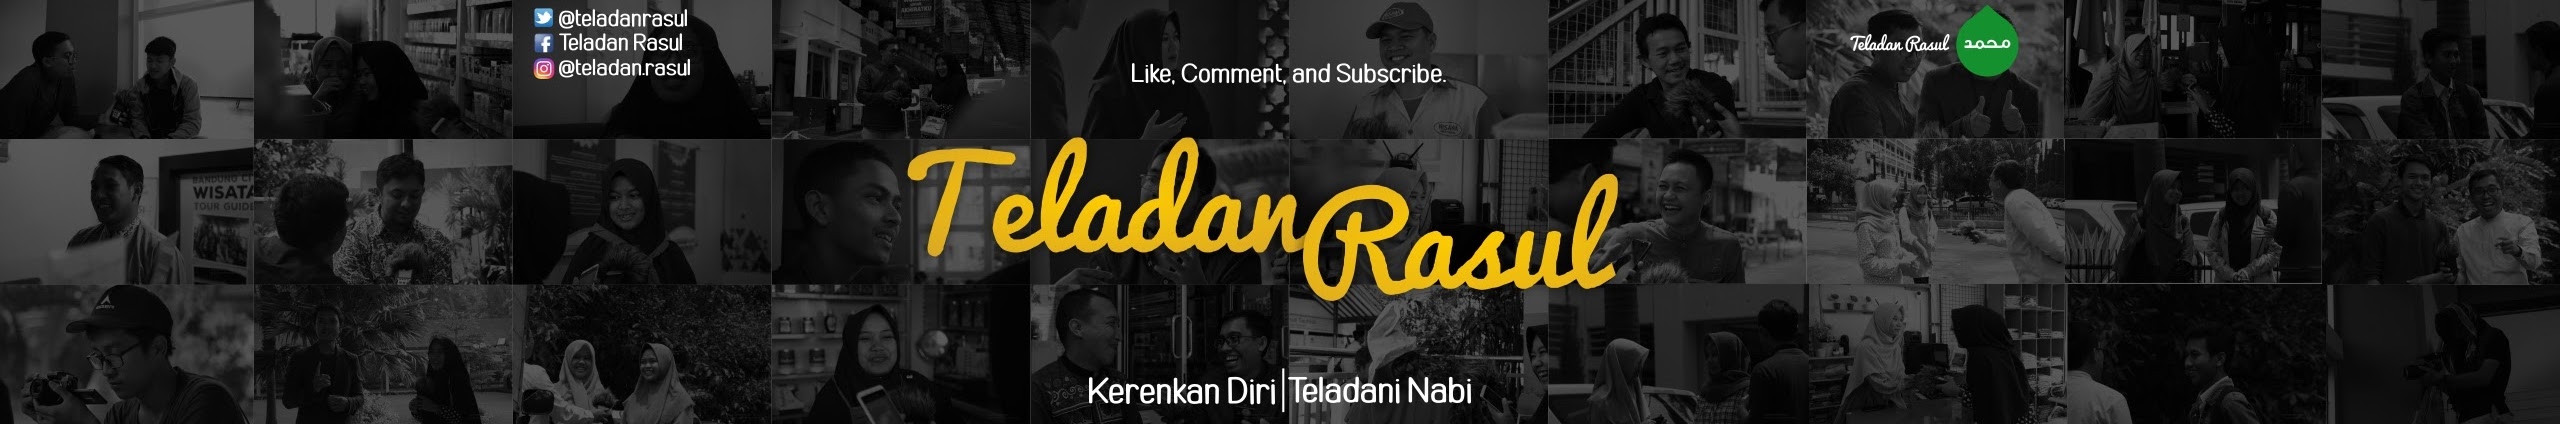 Teladan Rasul Youtube Channel Analytics And Report Powered By Noxinfluencer Mobile